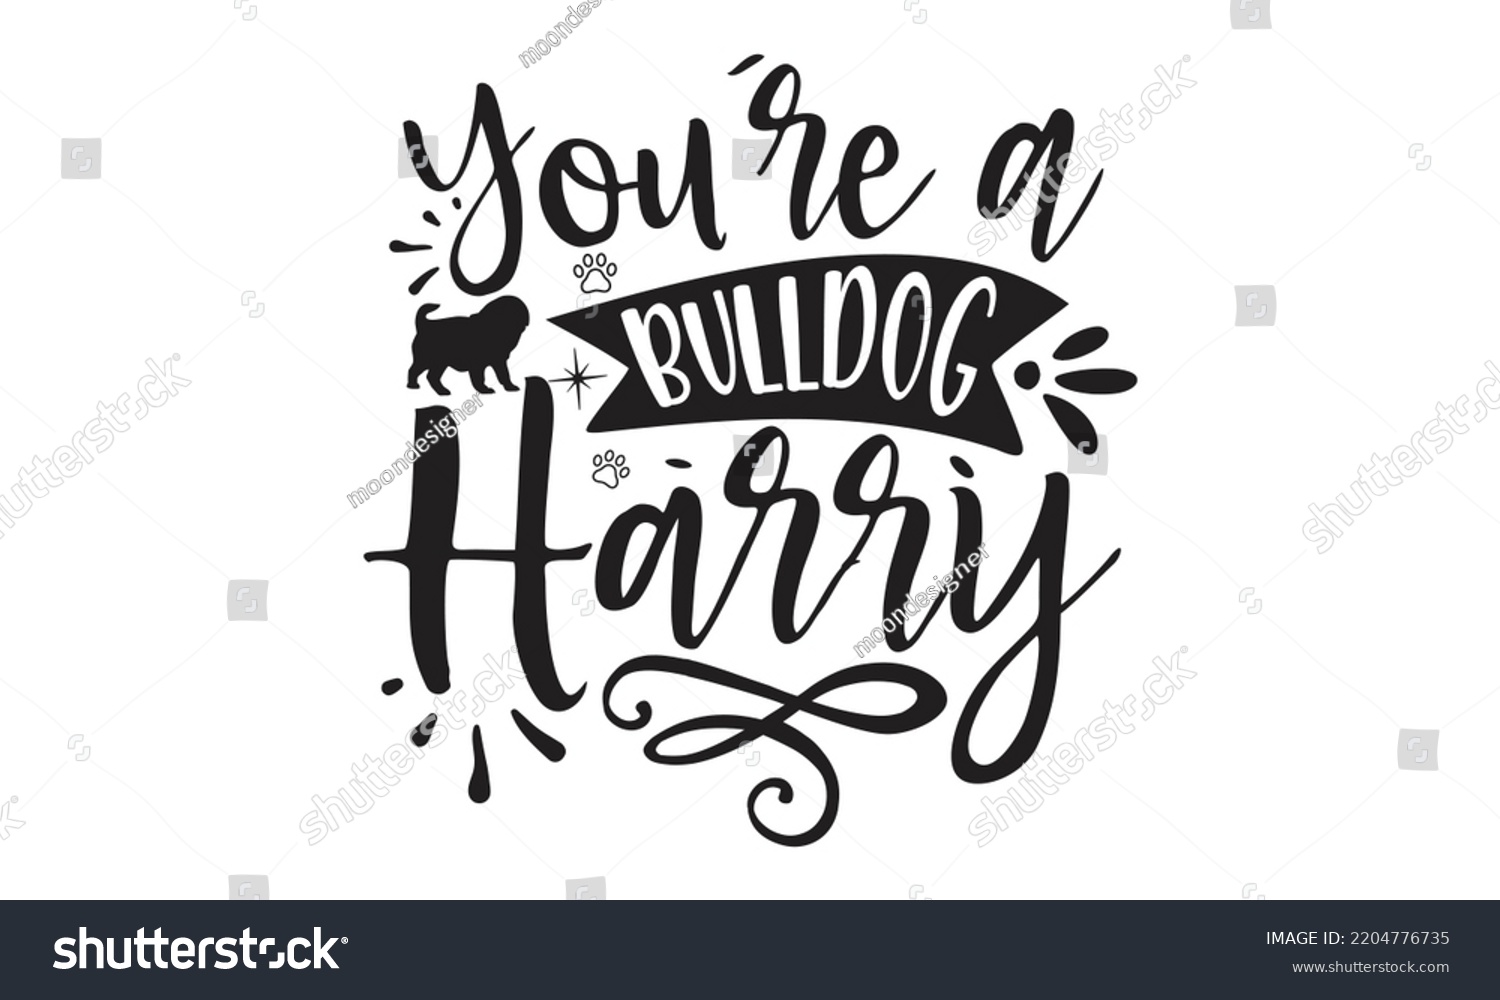 SVG of You’re a bulldog harry - Bullodog T-shirt and SVG Design,  Dog lover t shirt design gift for women, typography design, can you download this Design, svg Files for Cutting and Silhouette EPS, 10 svg